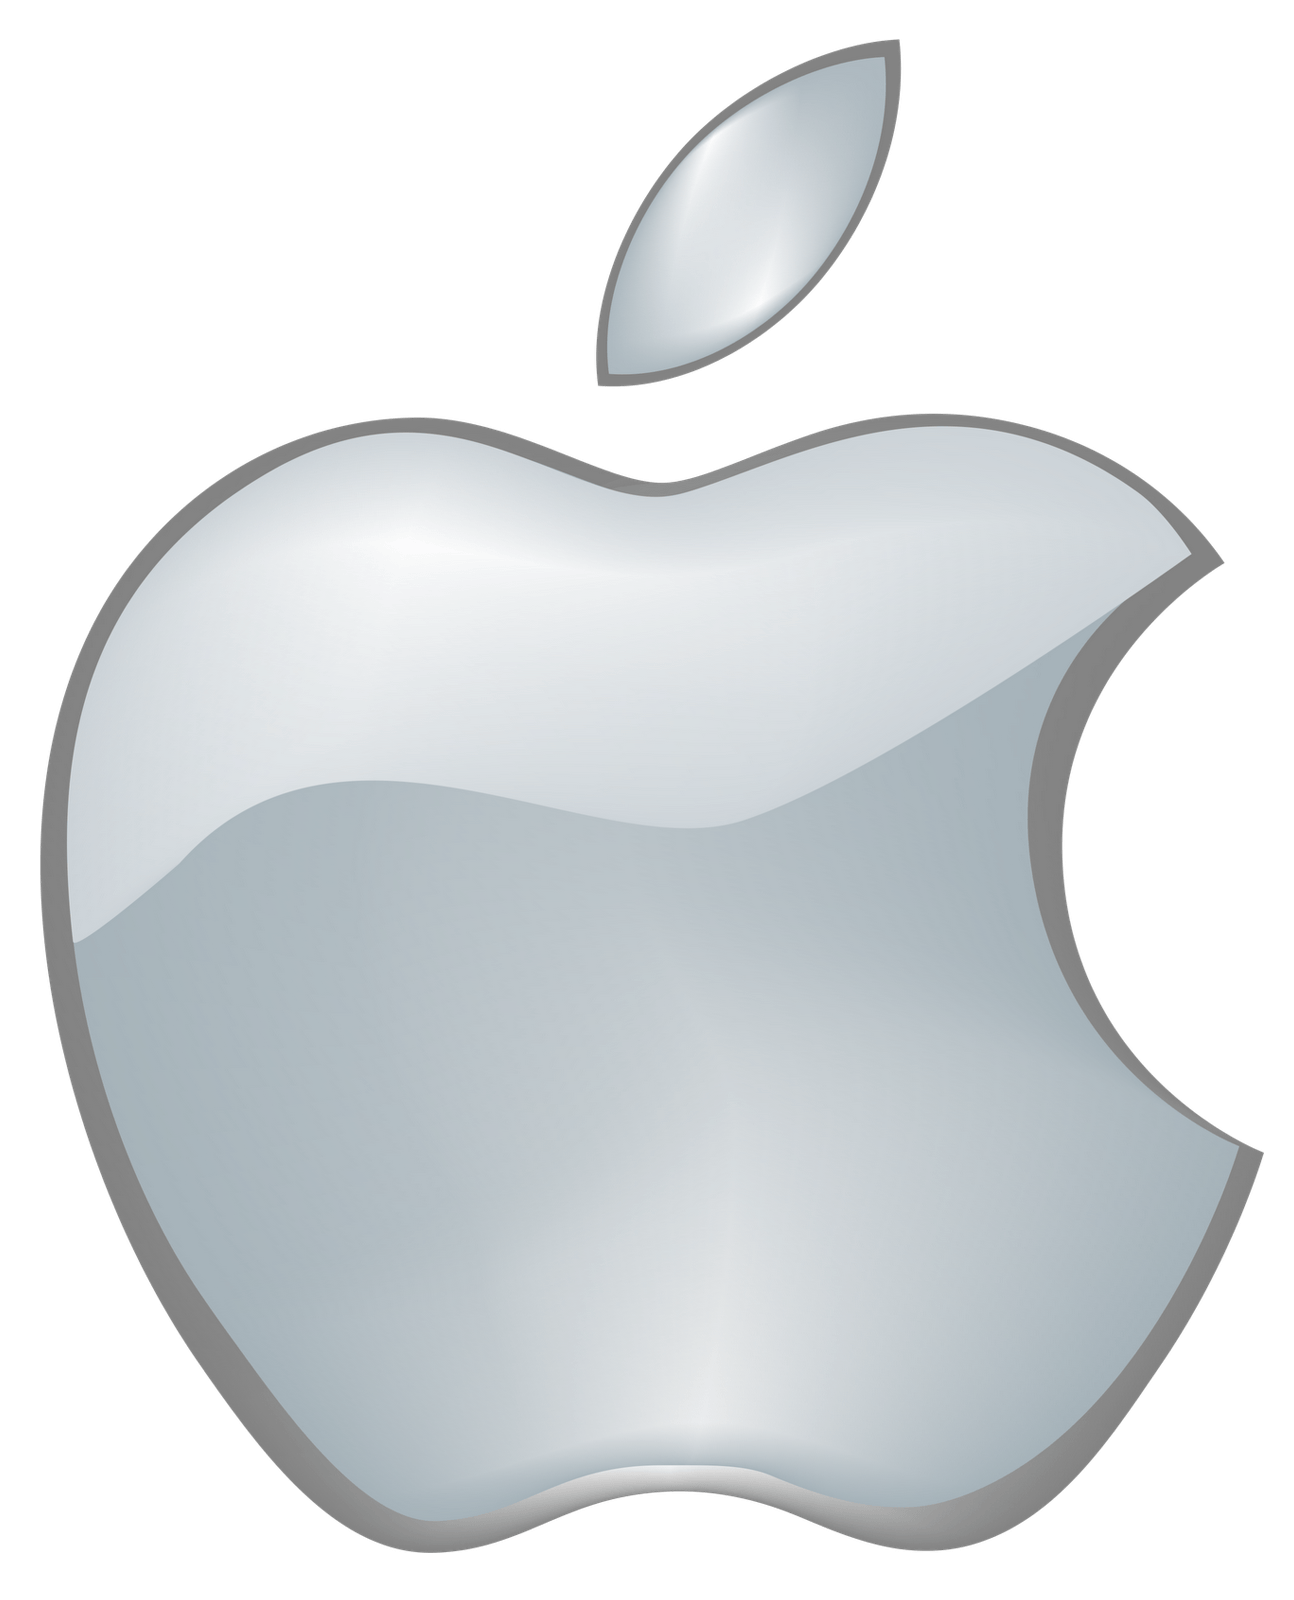 No Apple Logo - Apple logo graphic black and white download transparent background